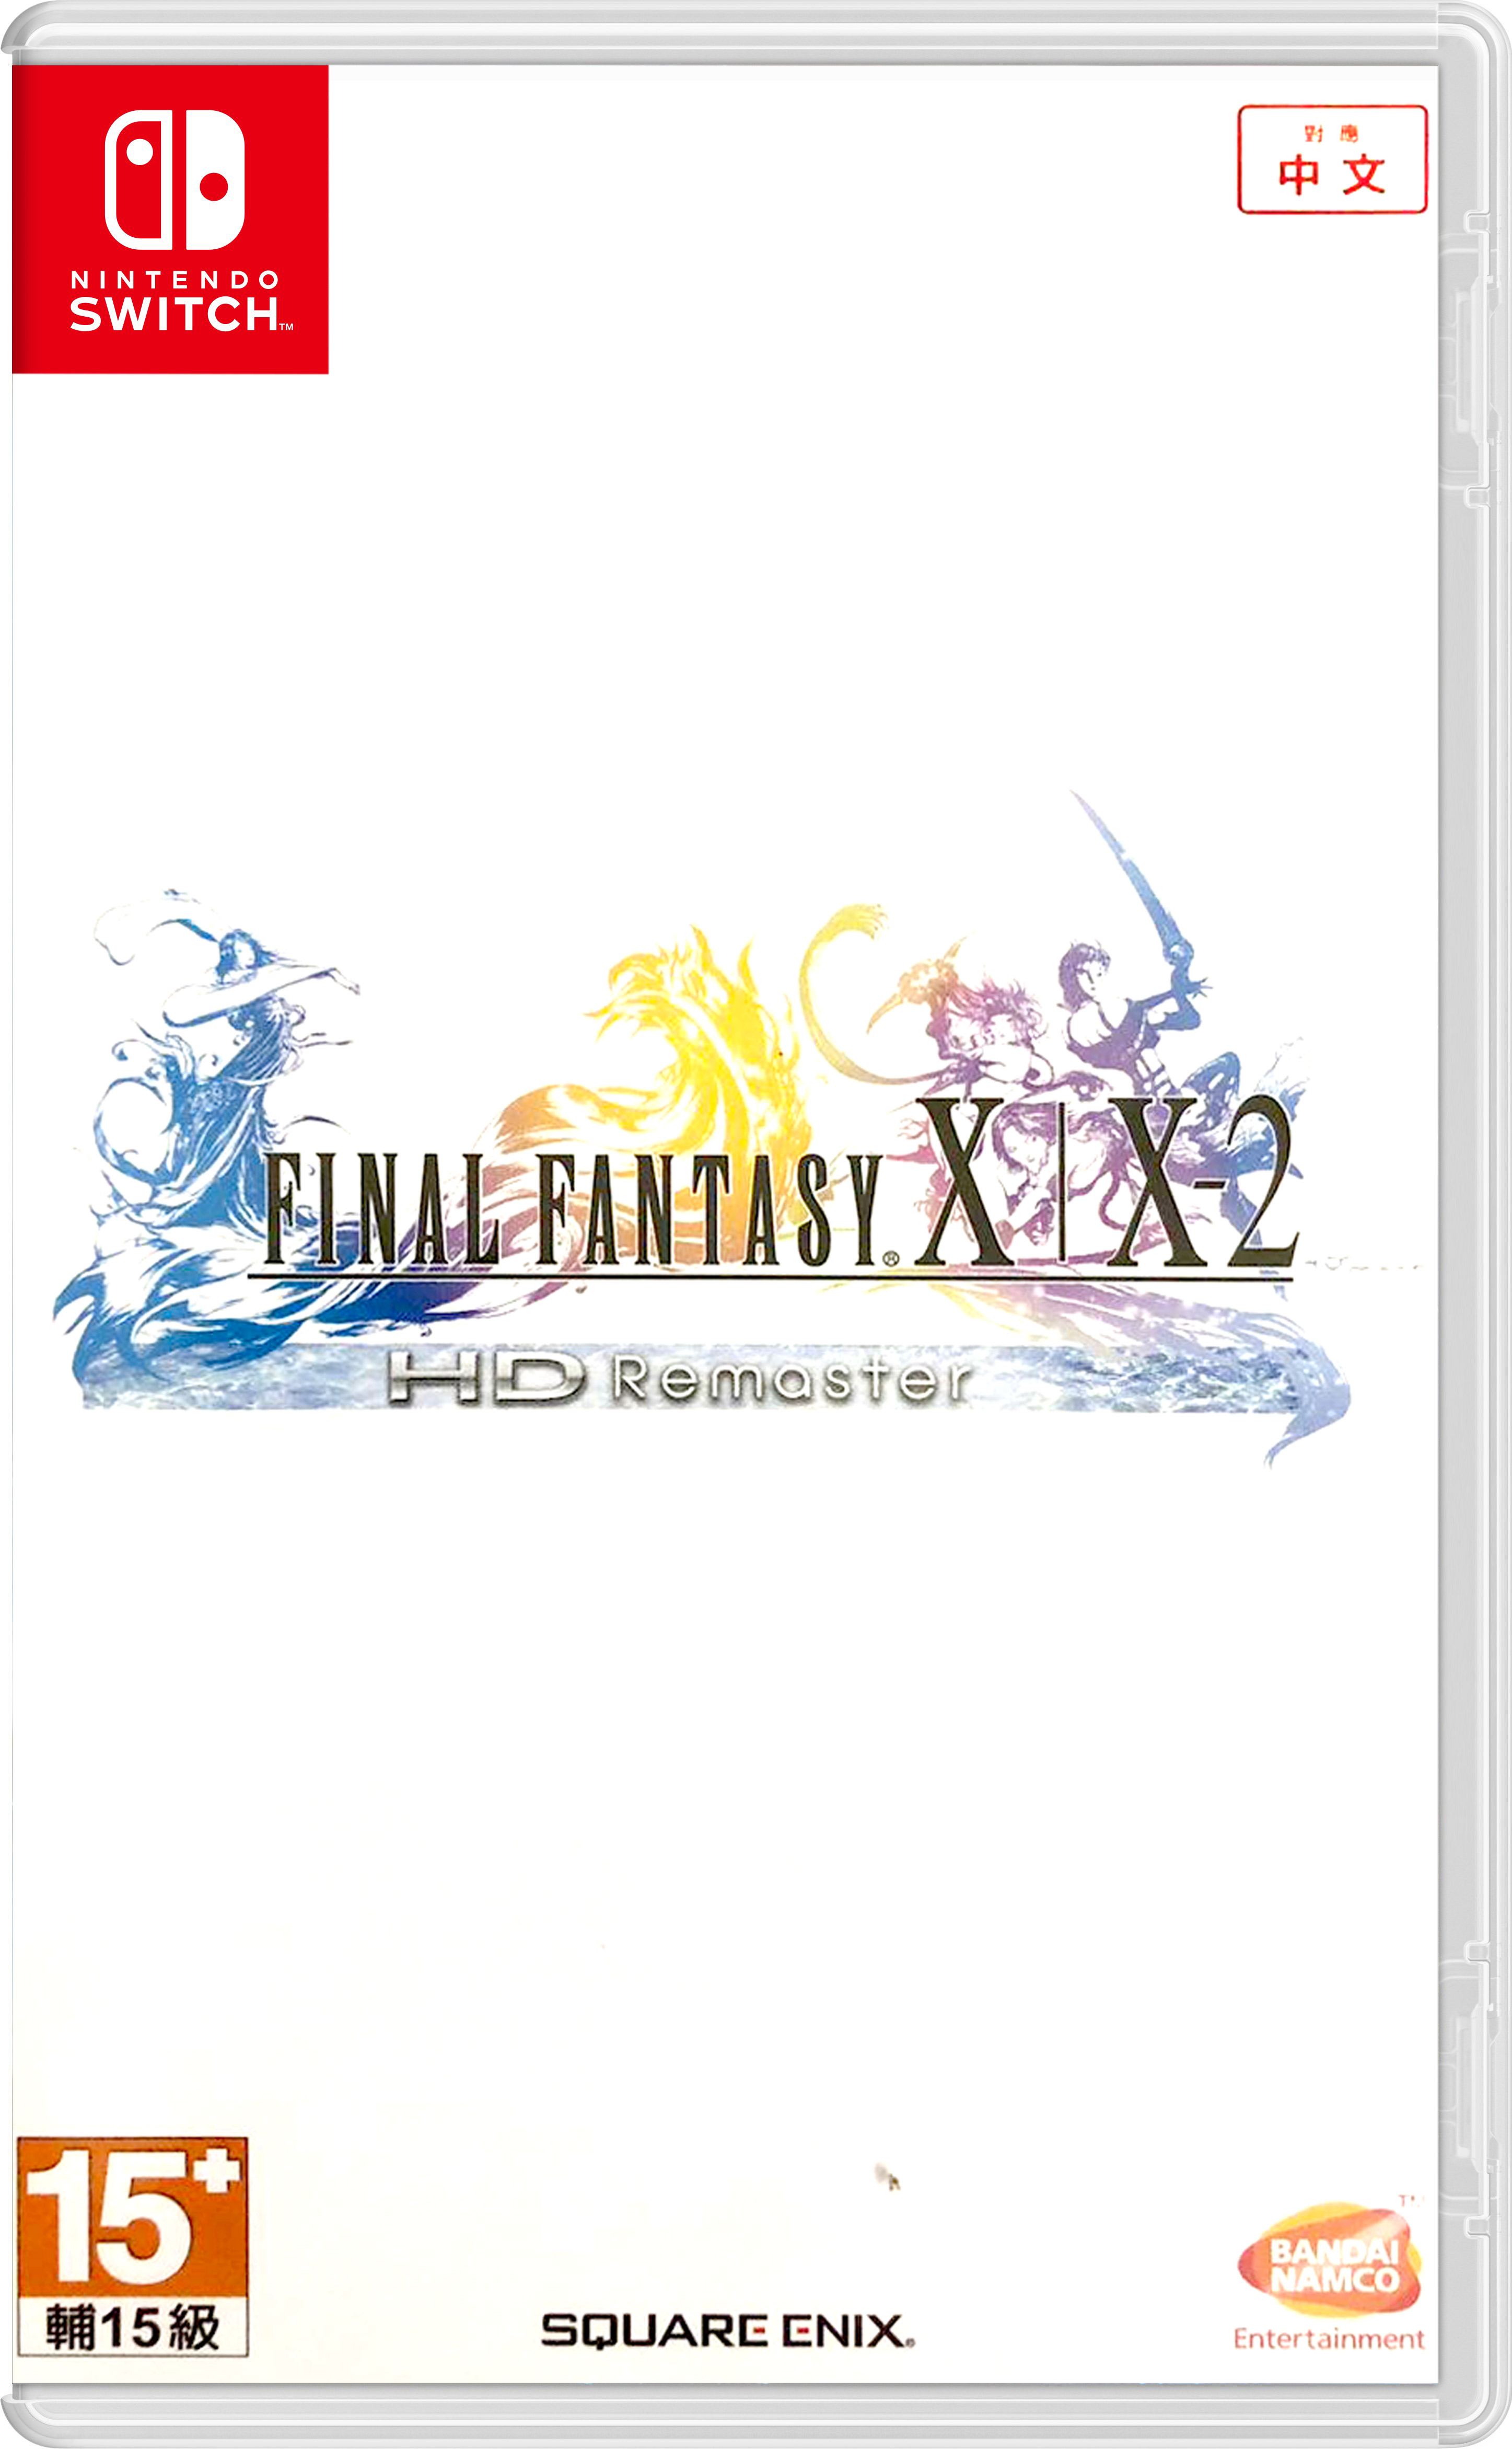 Final Fantasy X X 2 Hd Remaster Multi Language Chinese Cover